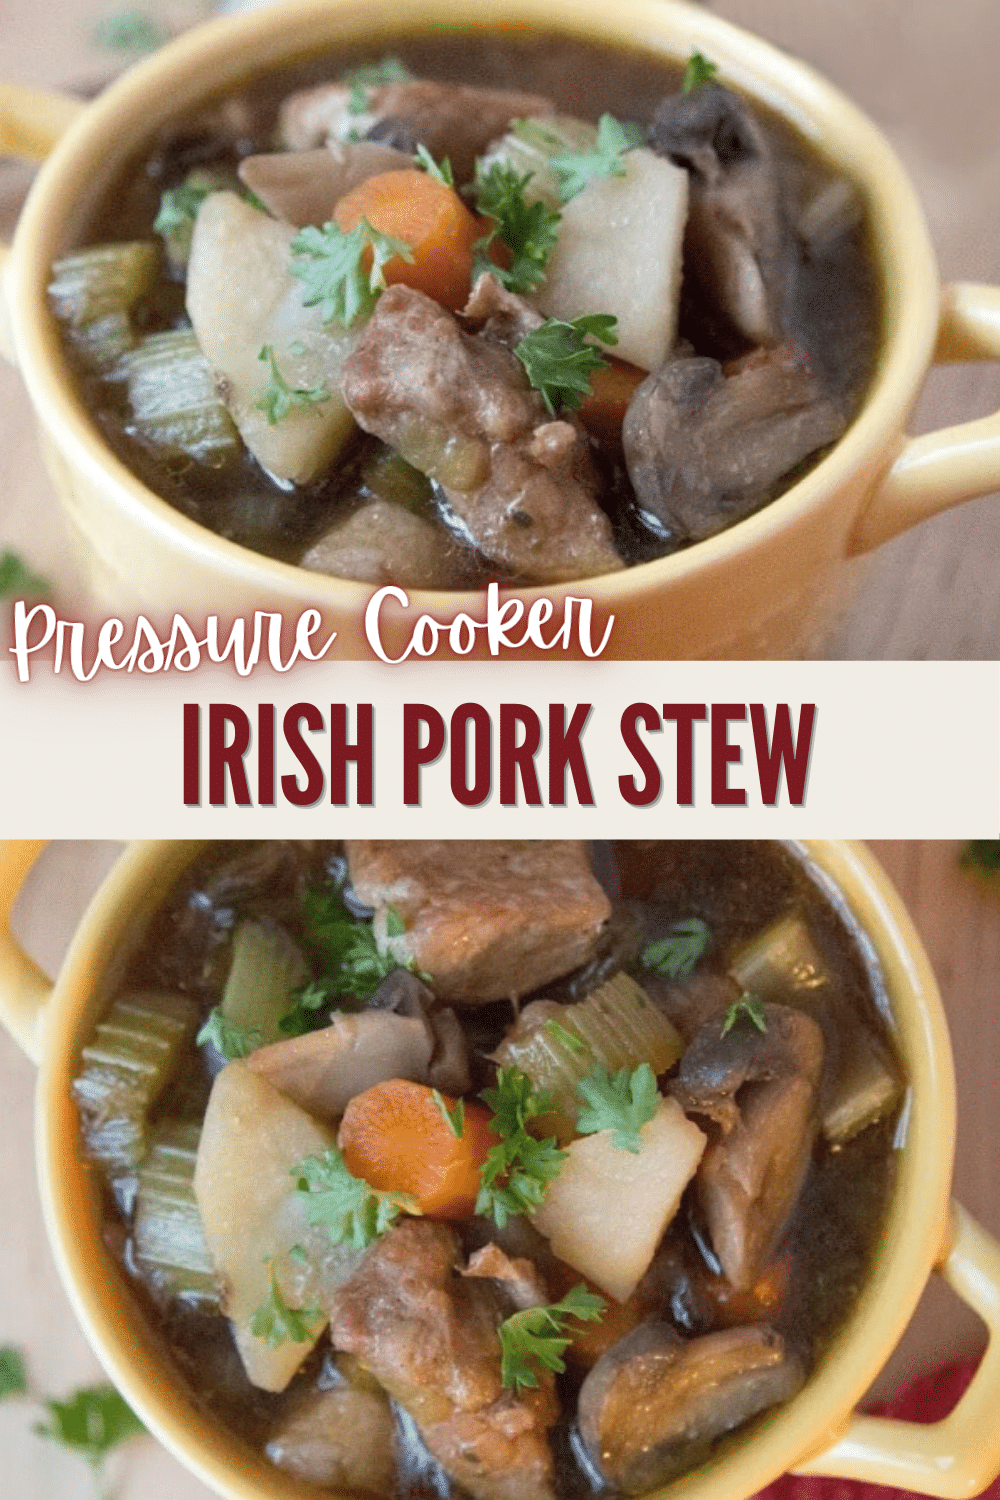 This Irish Pork Stew is hearty and flavorful. Even better, it’s super easy to make since the pressure cooker will do most of the work! Natural, wholesome ingredients. #instantpotrecipes #porkrecipes #easydinner #pressurecooker via @wondermomwannab